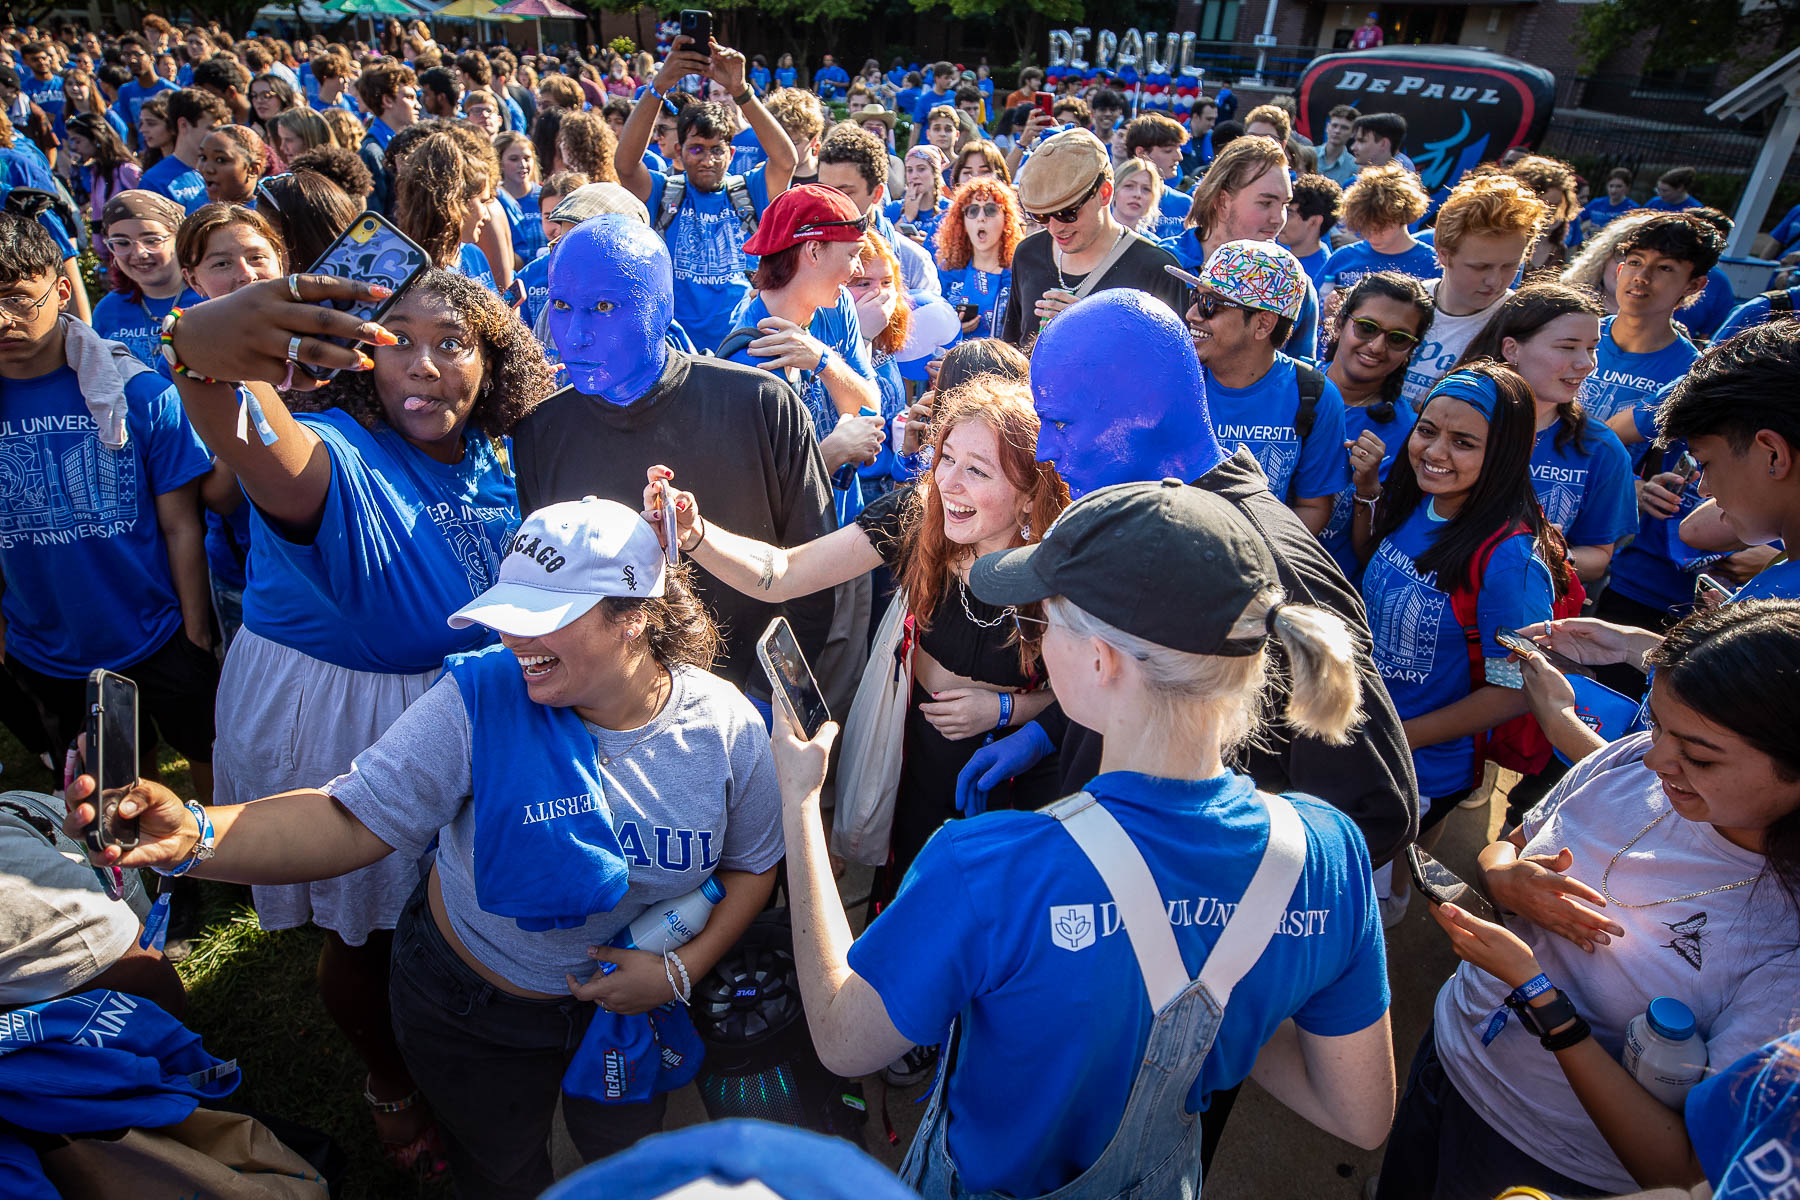 As the Blue Man Group made their way from University Hall to the stage, they posed for hundreds of selfies with enthusiastic students. (DePaul University/Jeff Carrion) 